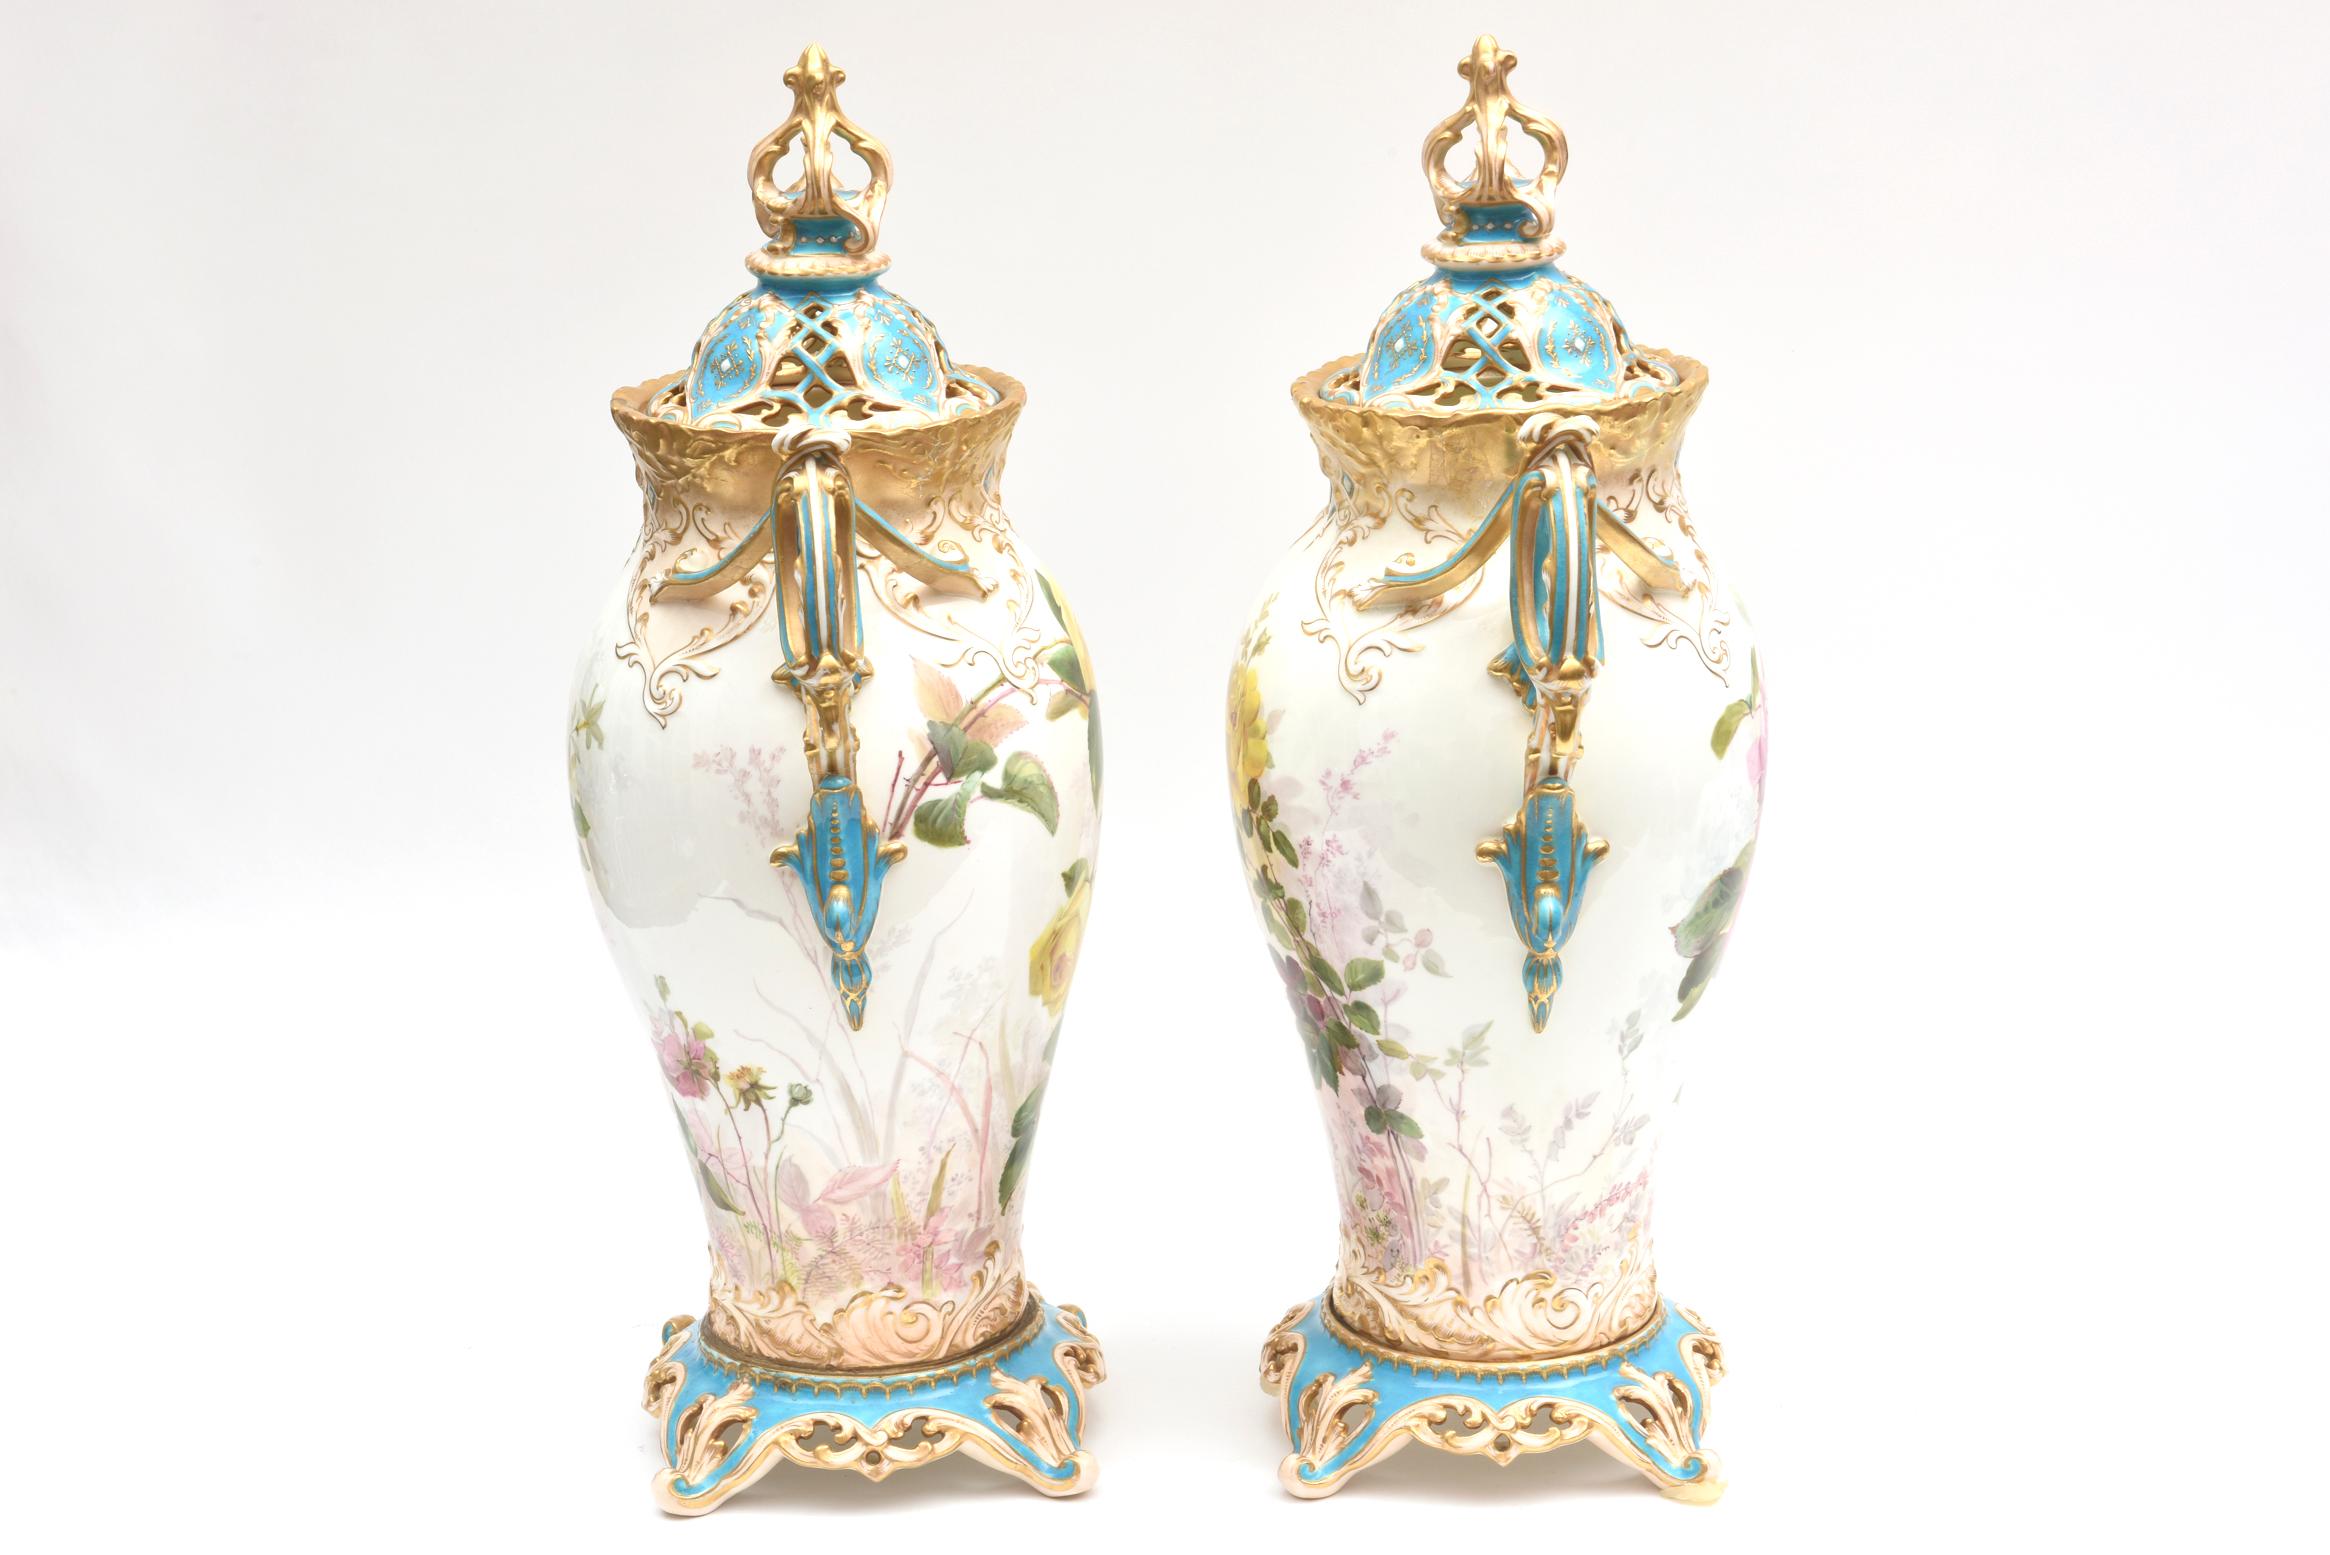 Belle Époque 19th Century English Covered Vases, Vibrant Turquoise, Exquisitely Crafted, Pair